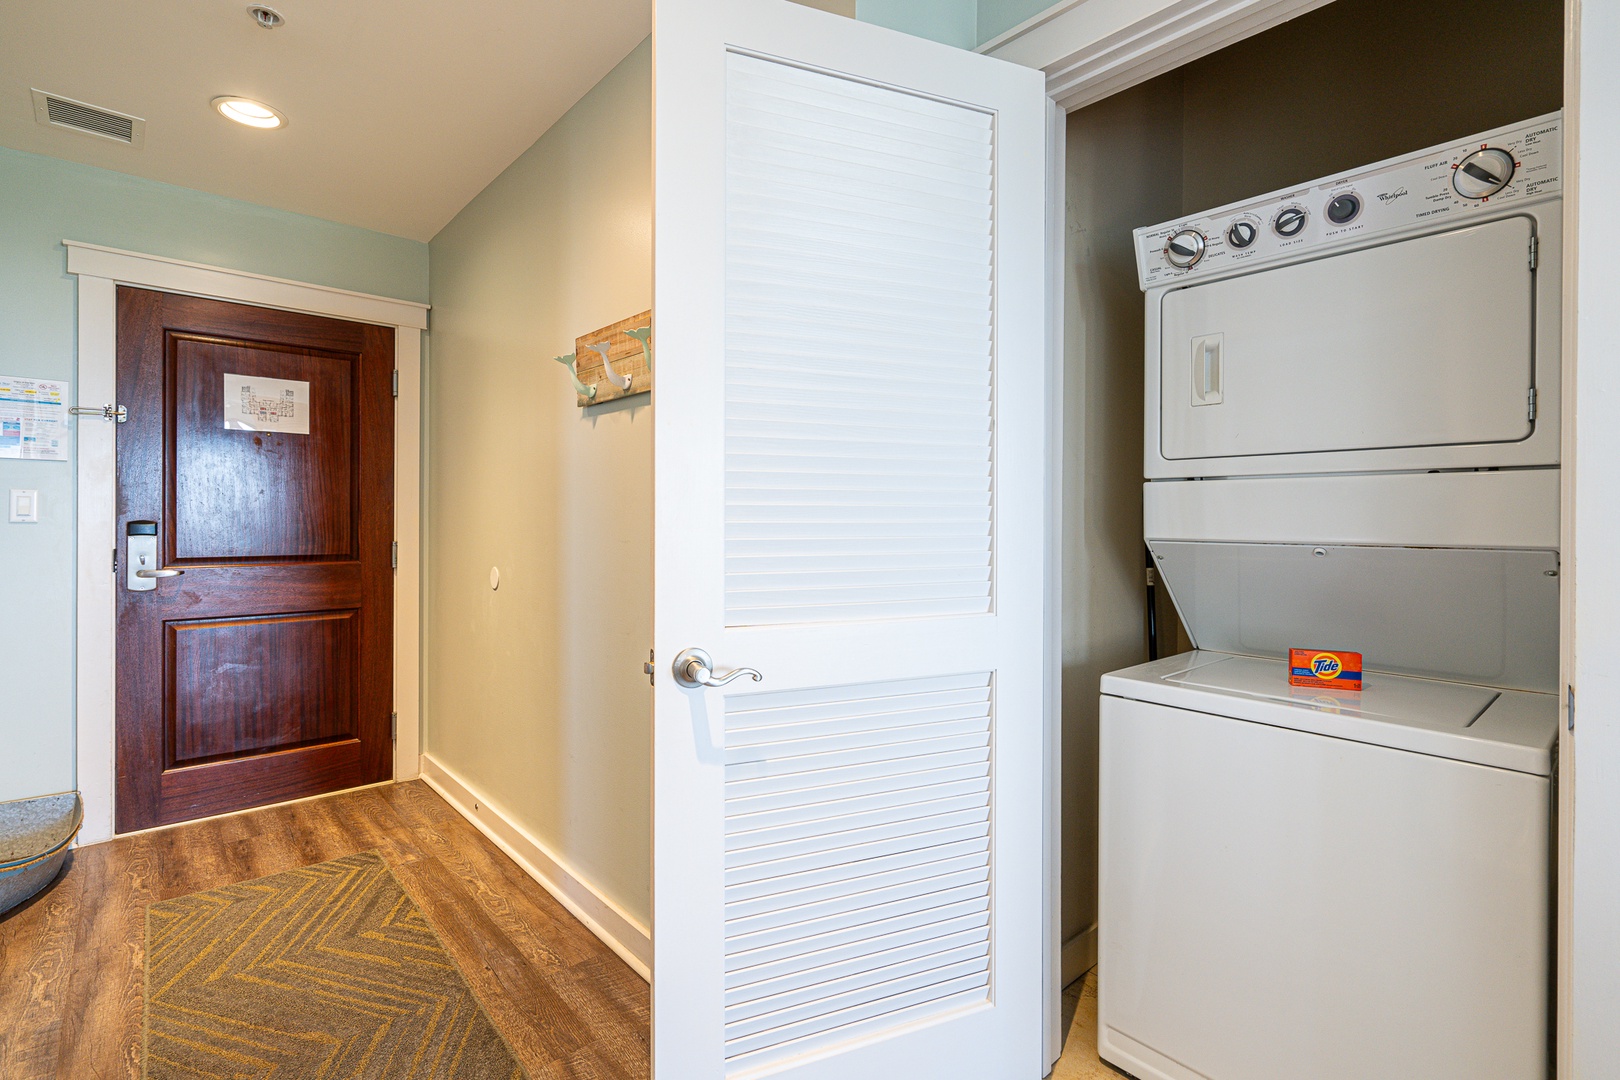 Private laundry is available for your stay, tucked away near the entryway